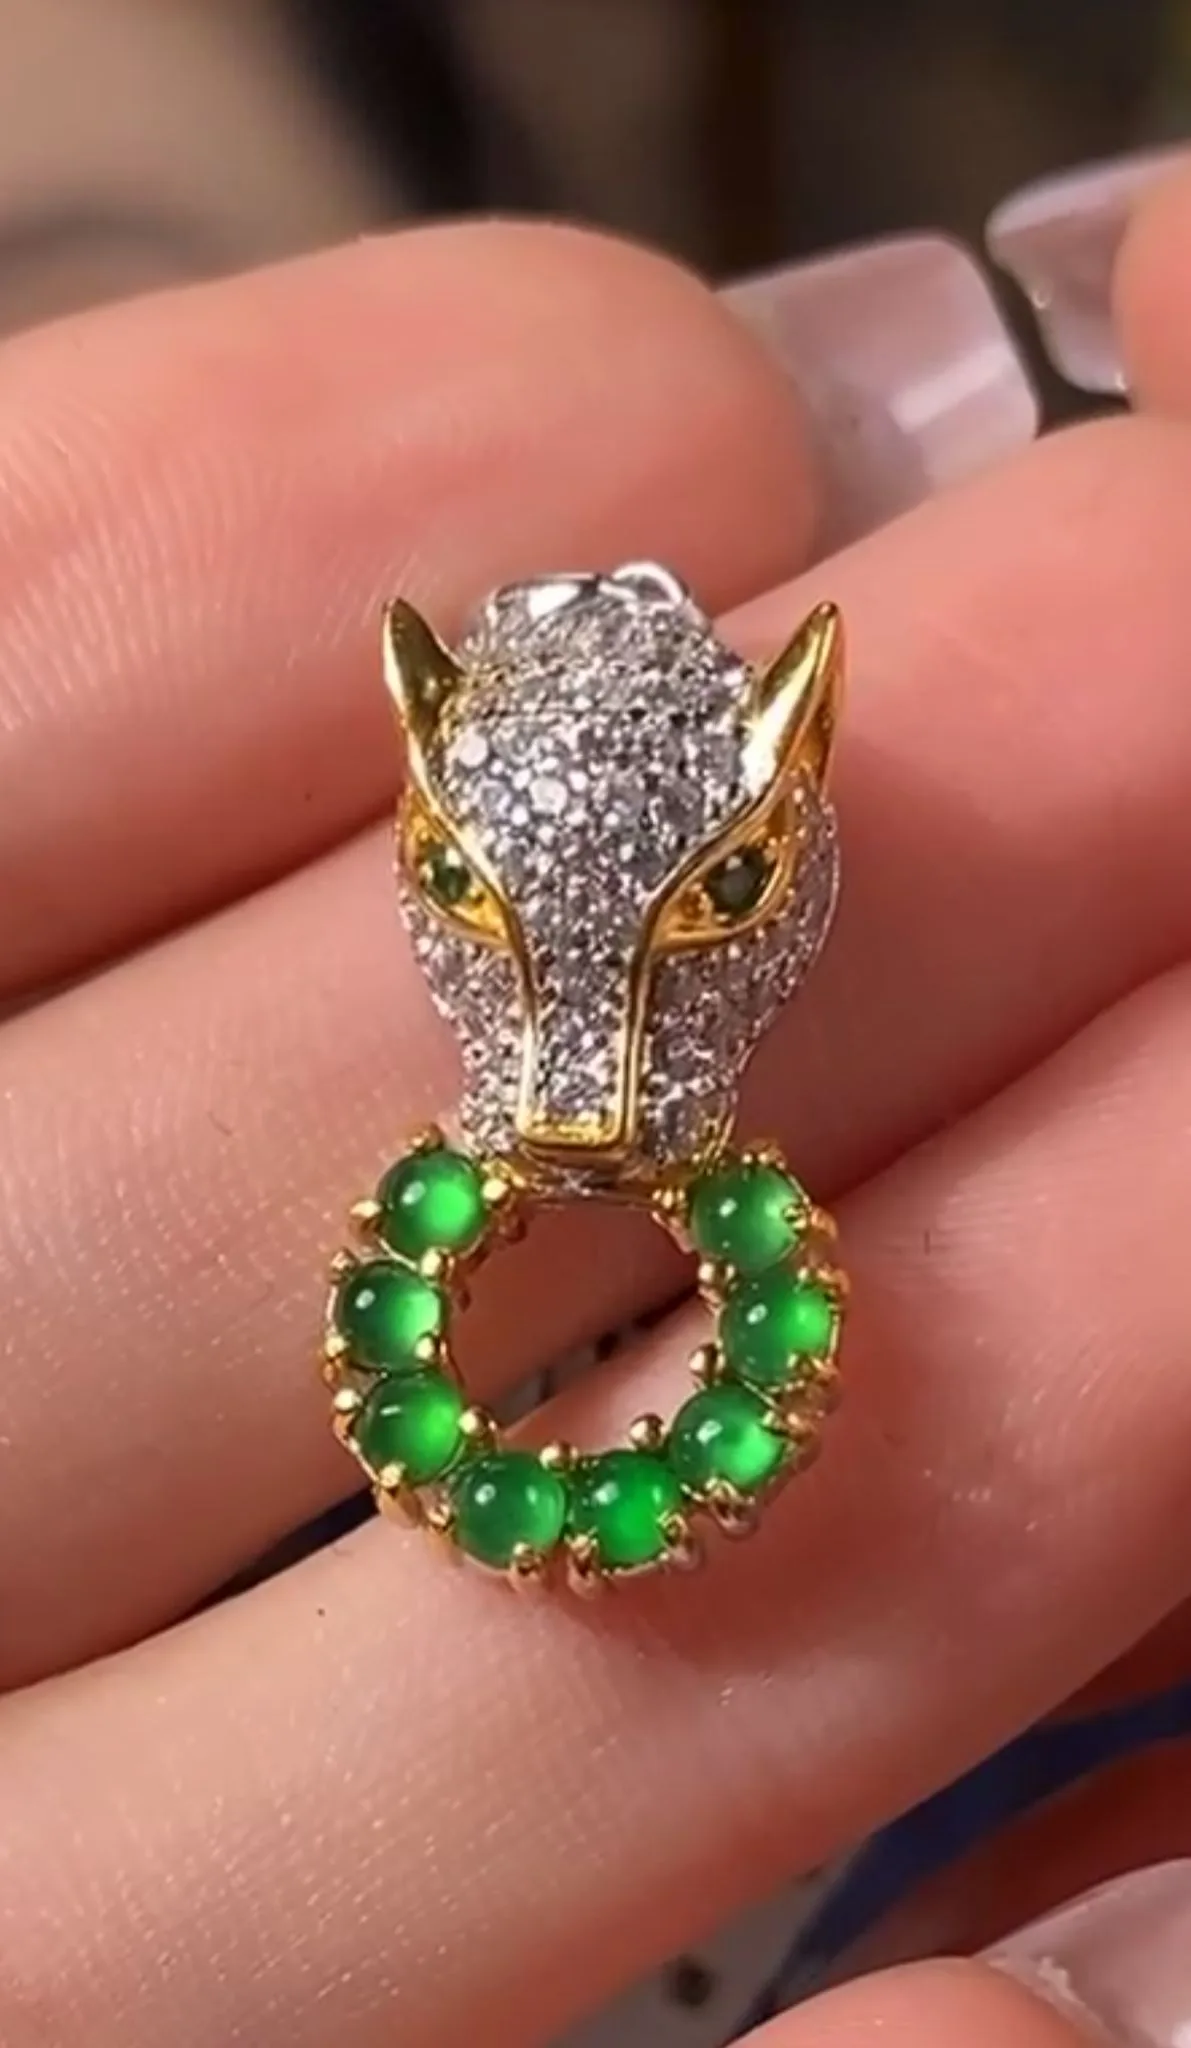 A hand delicately holds a Green Jade Pendant with Silver Inlay, showcasing a detailed fox head design with sparkling stones and golden accents. The fox's neck is adorned with a circle of luminous green jade beads set in a gold-tone base, creating an aura of elegance and mystery. The intricate craftsmanship and vivid colors of the pendant make it a captivating accessory.